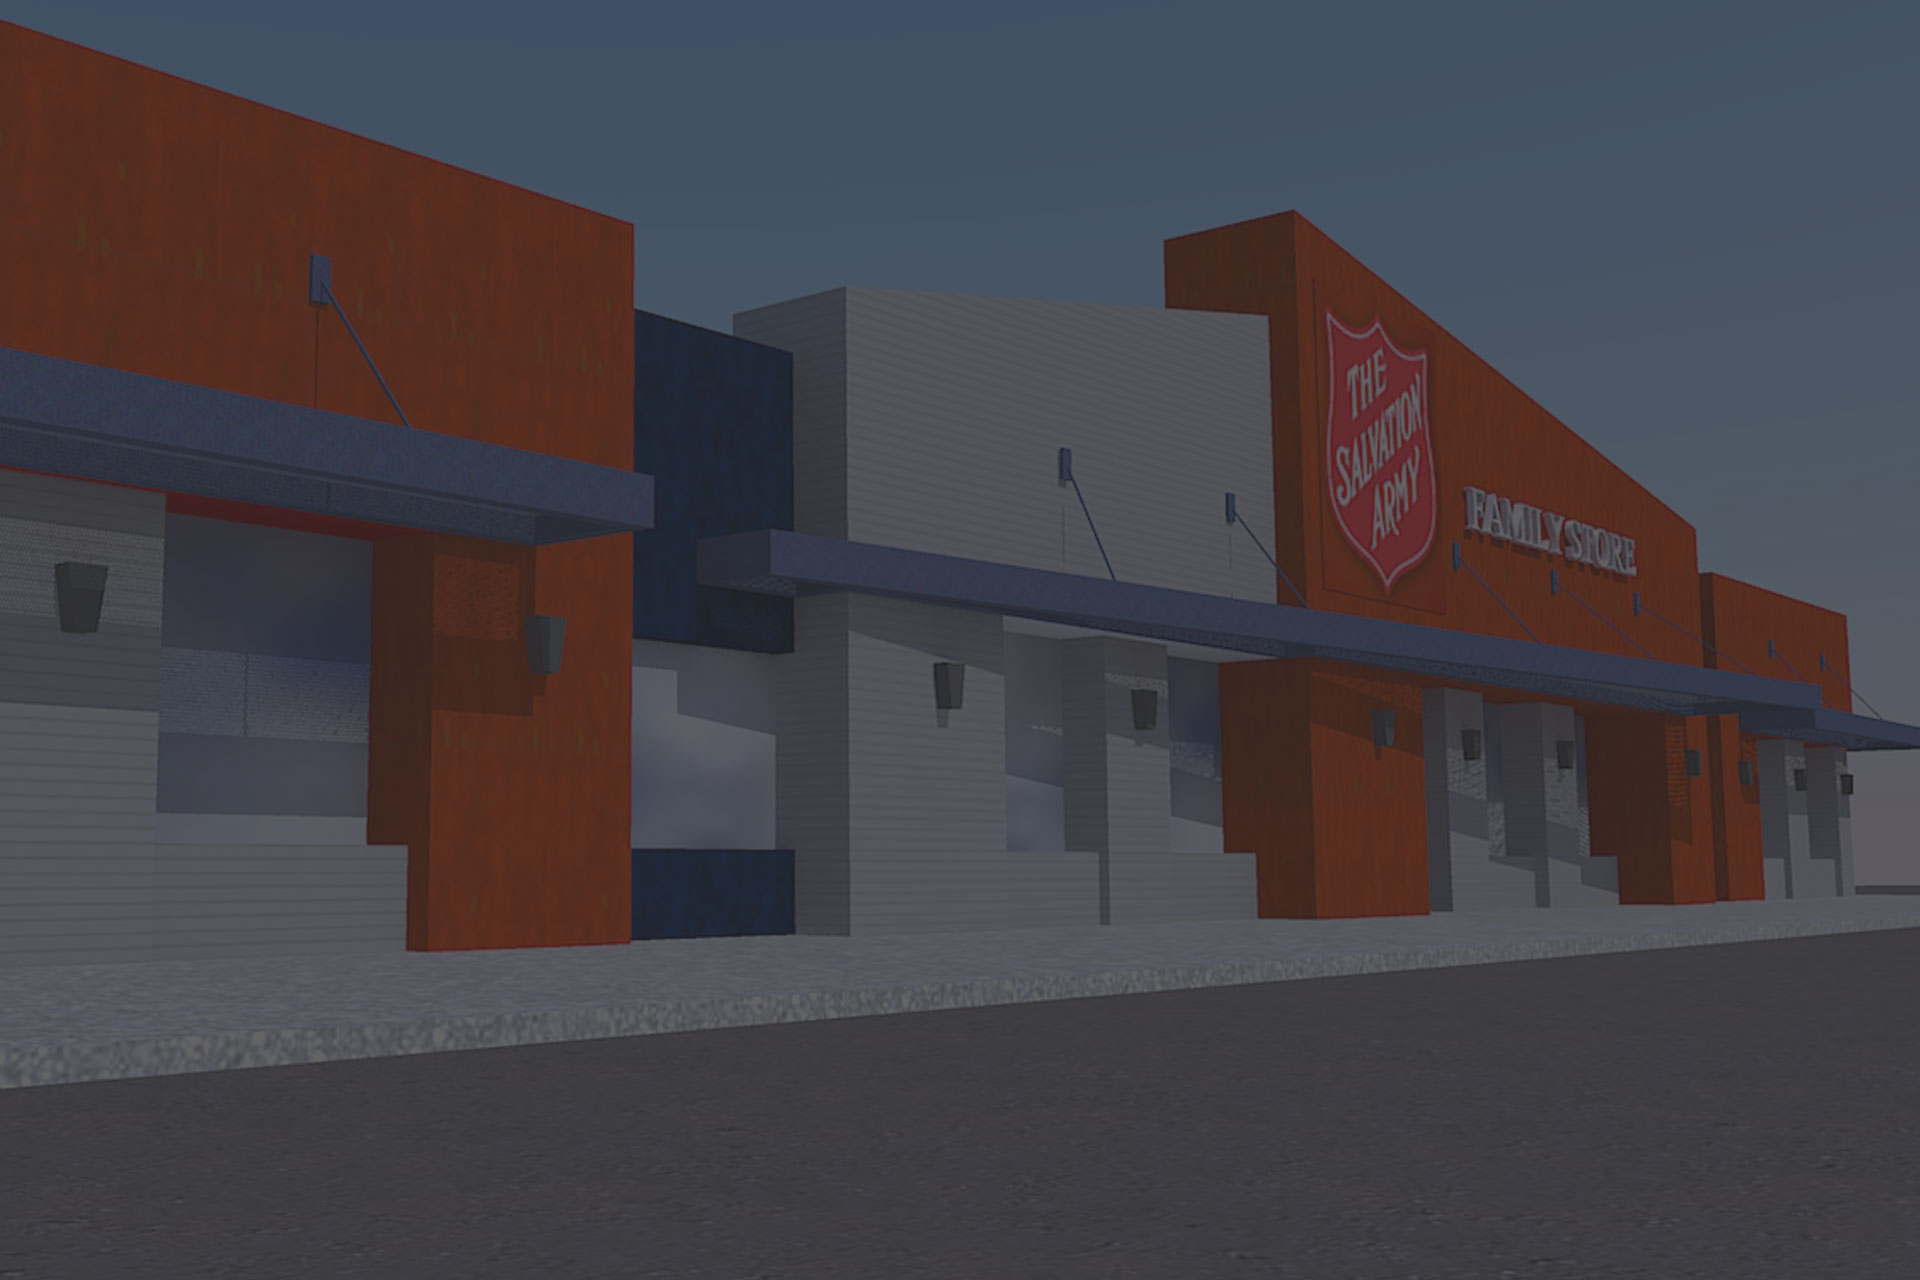 Architectural Rendering for SALVATION ARMY MAIN FAMILY STORE